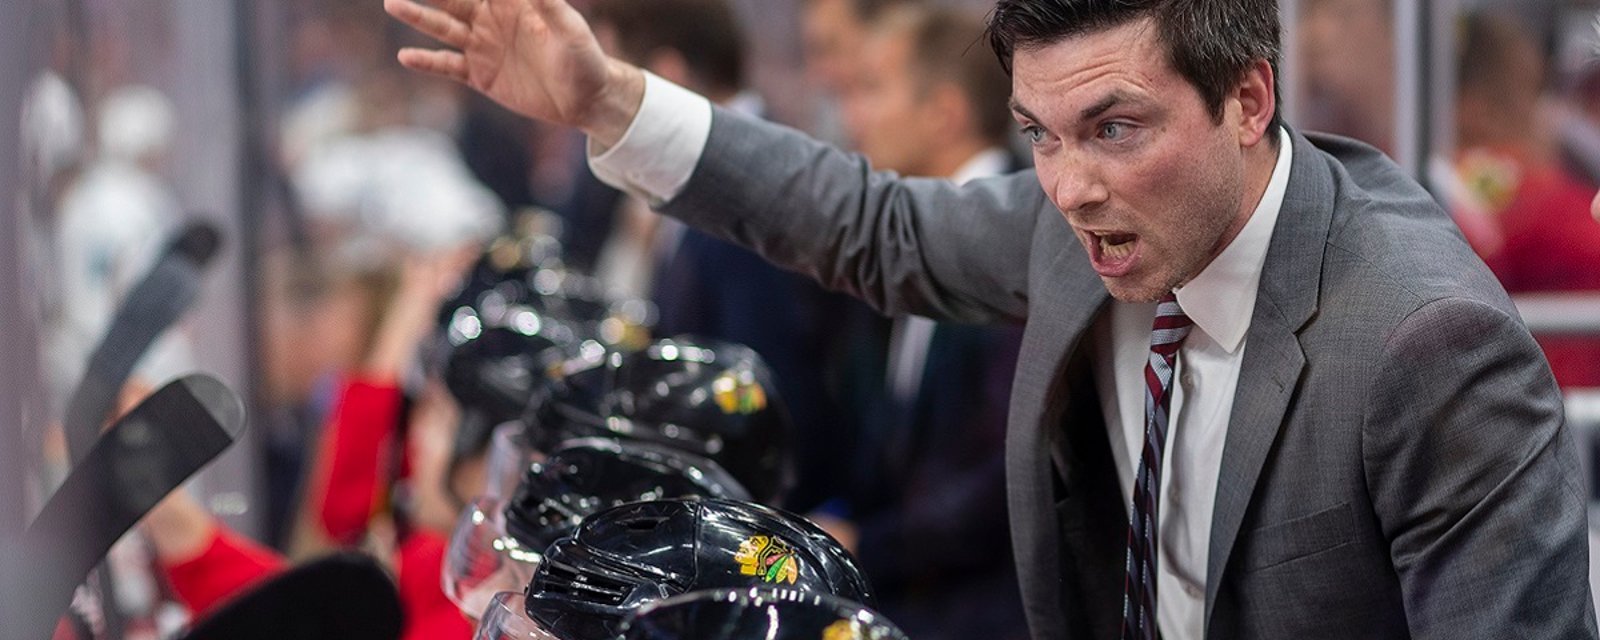 Blackhawks head coach Jeremy Colliton calls out several members of the Lightning.